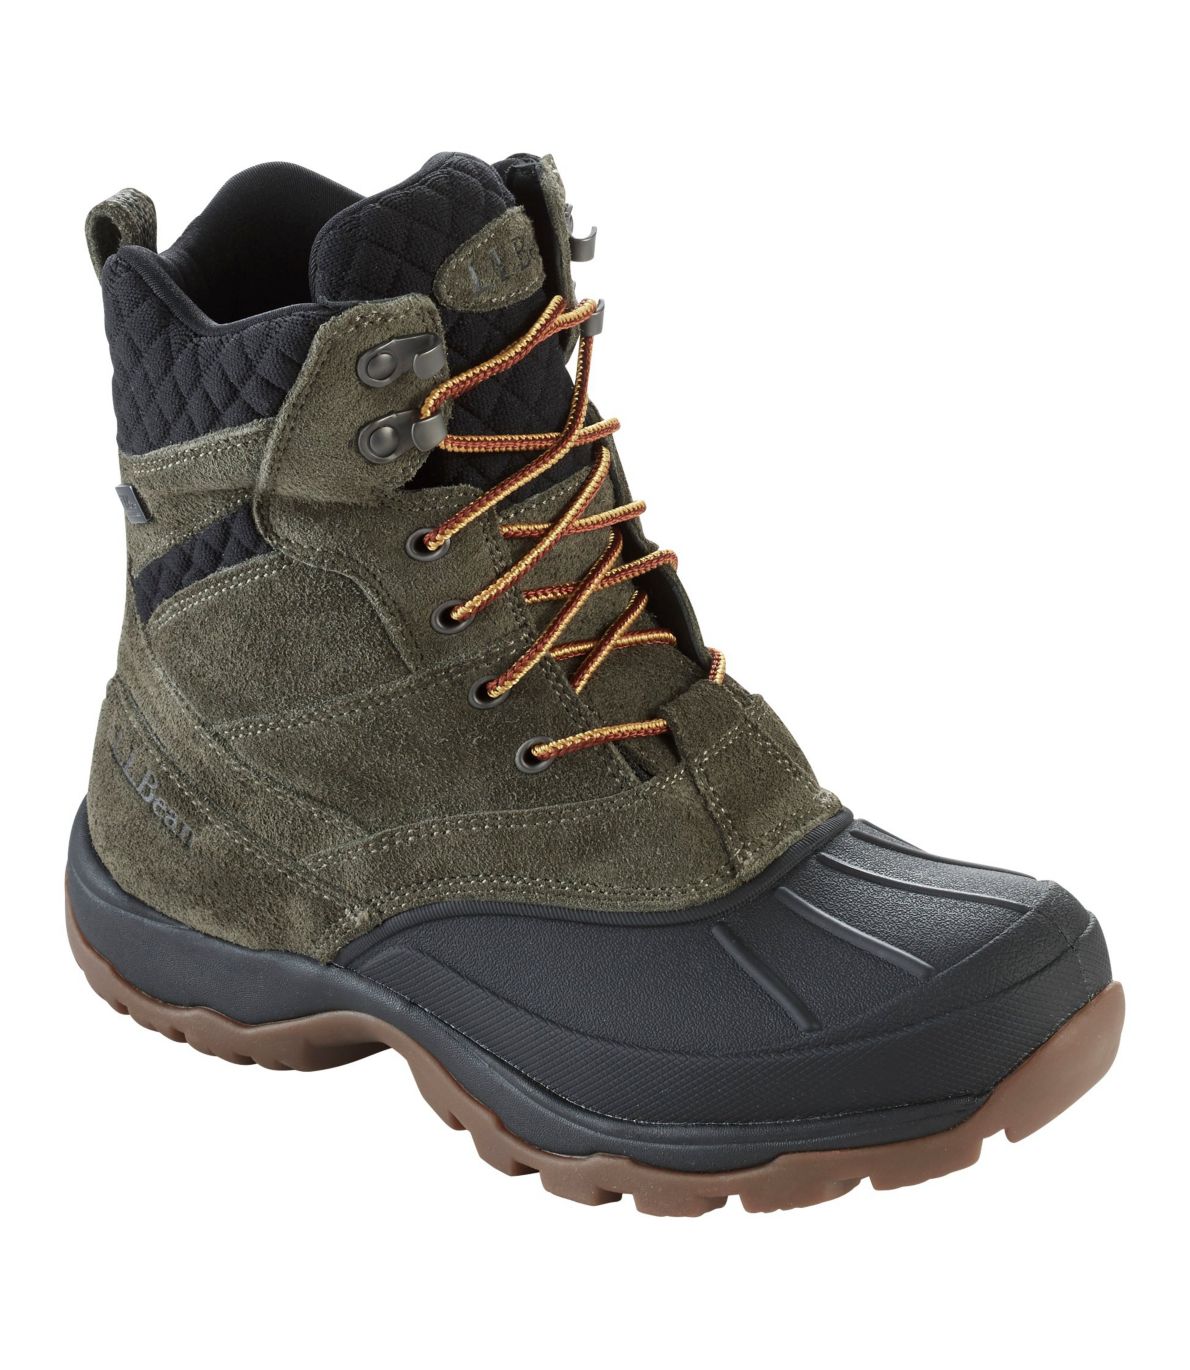 Men's Storm Chaser Suede Boots, Lace-Up